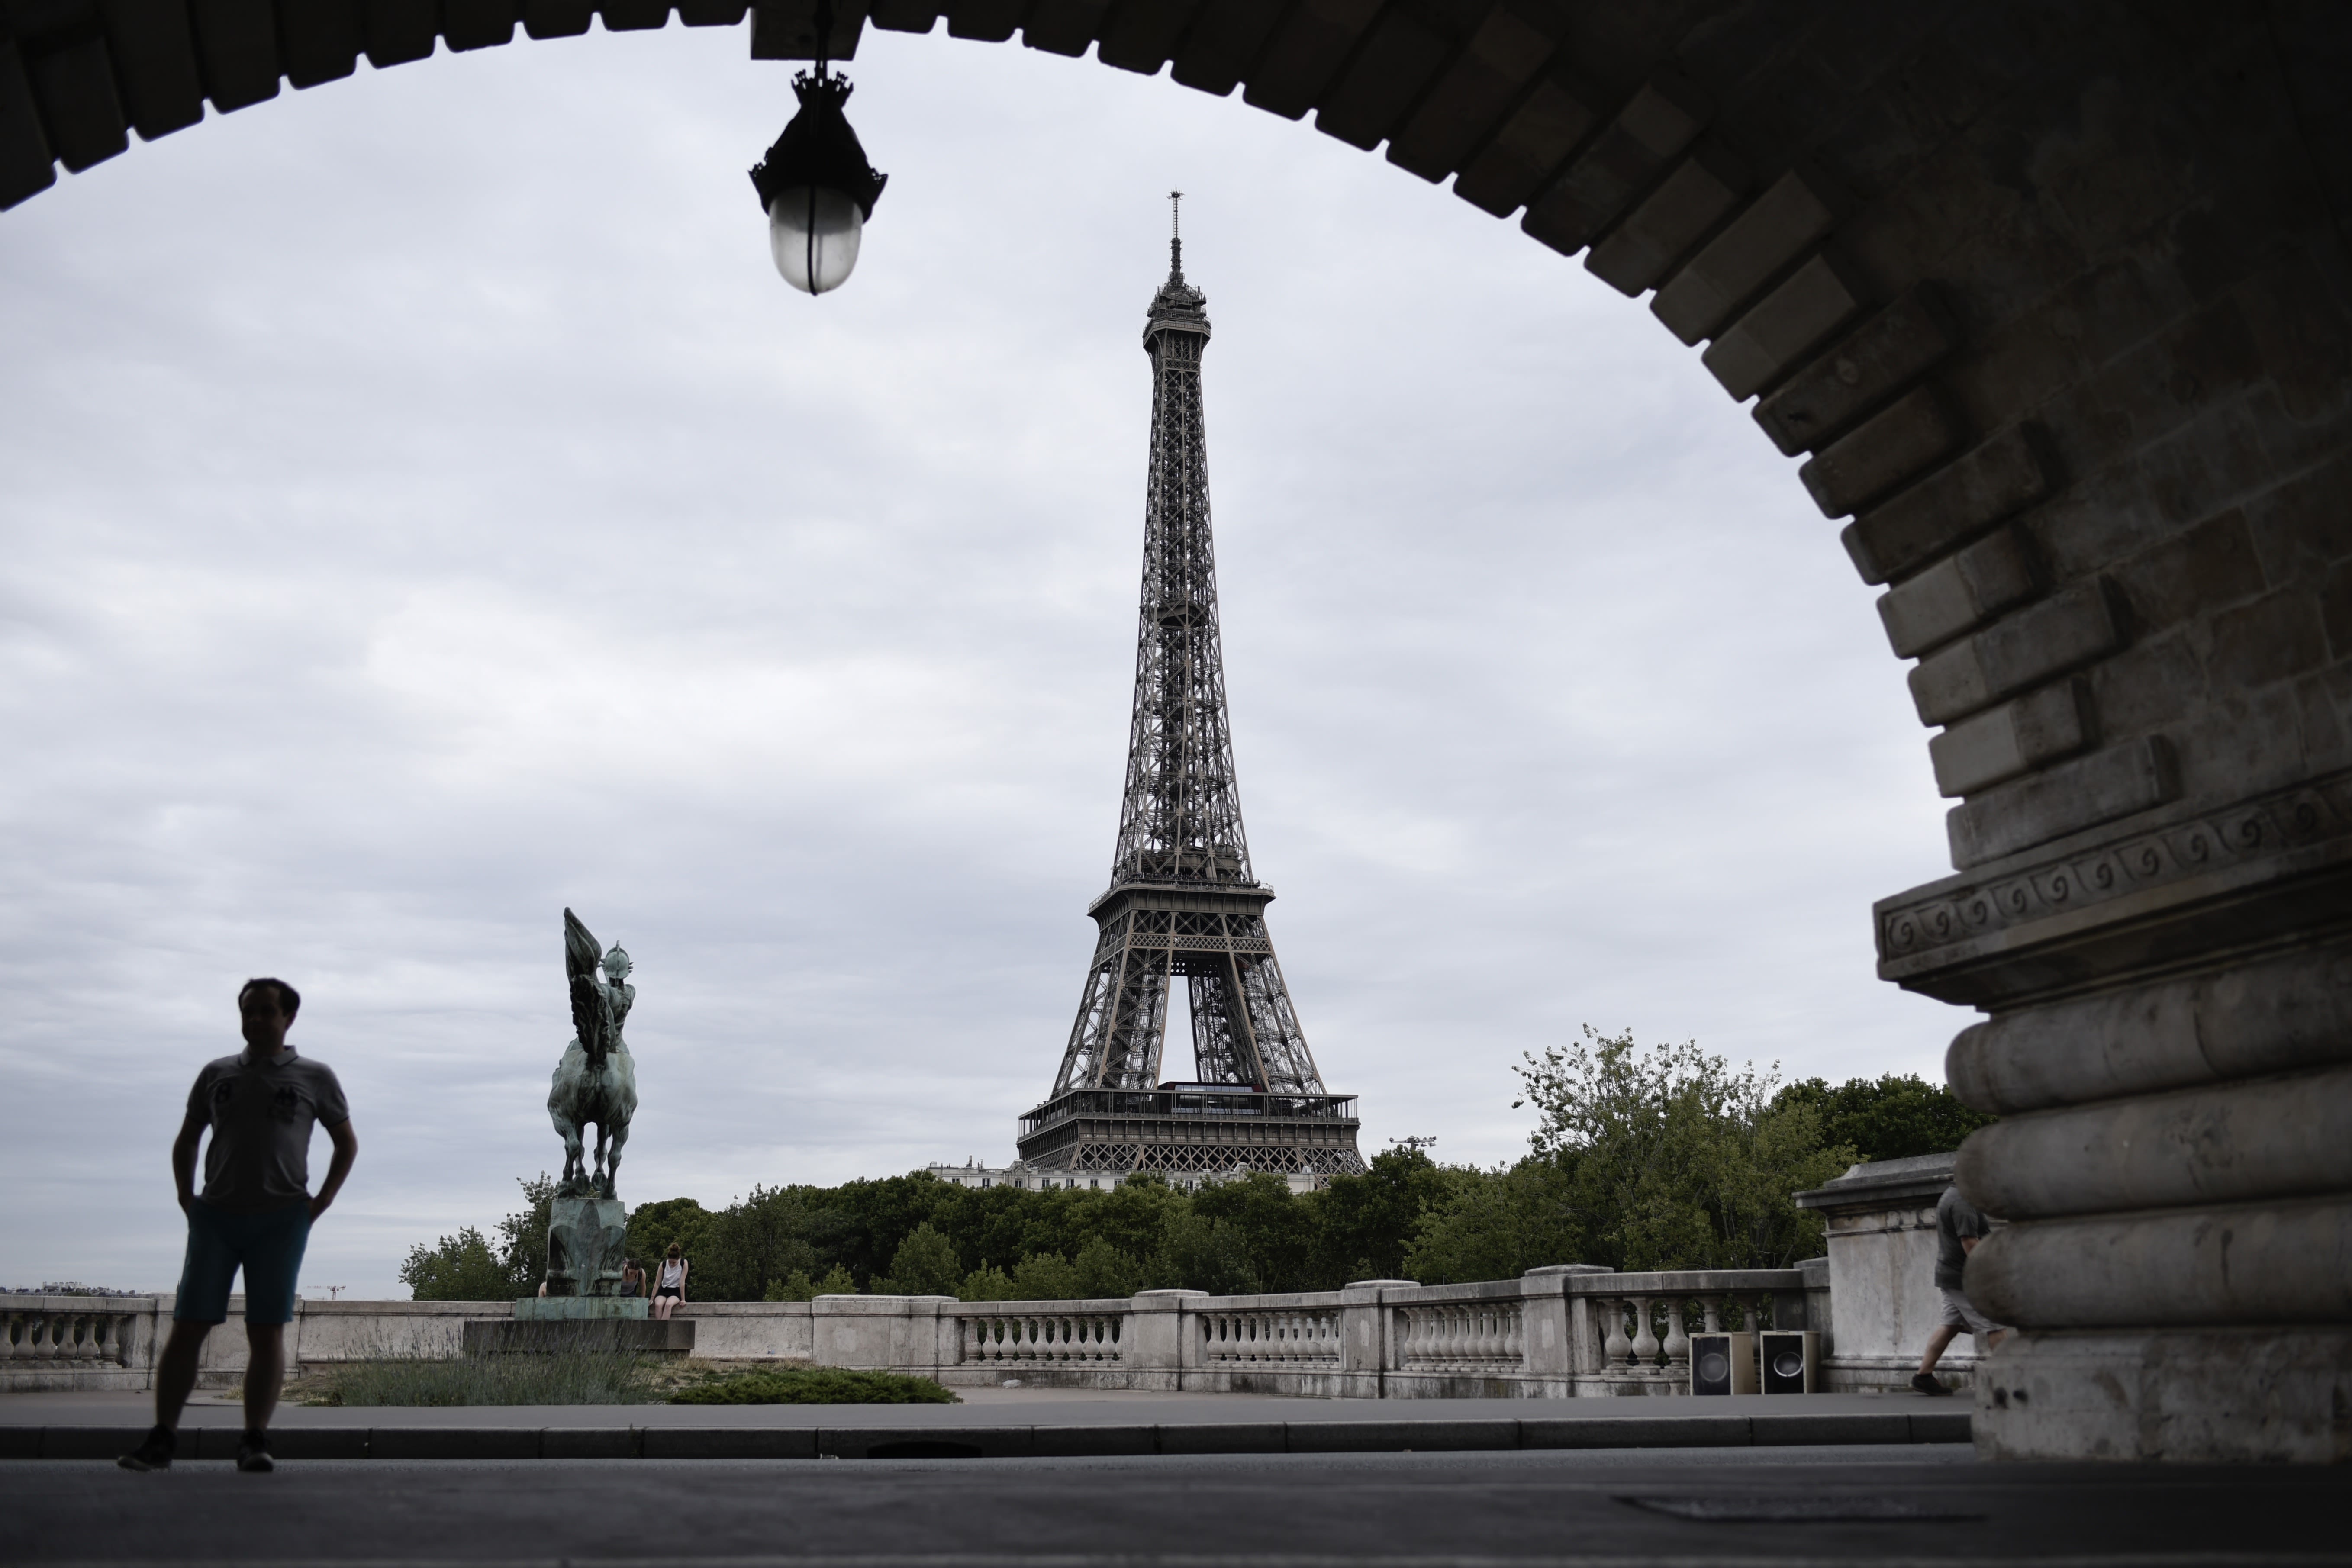 France opens counter-terrorism probe into knife-wielding man at Eiffel Tower